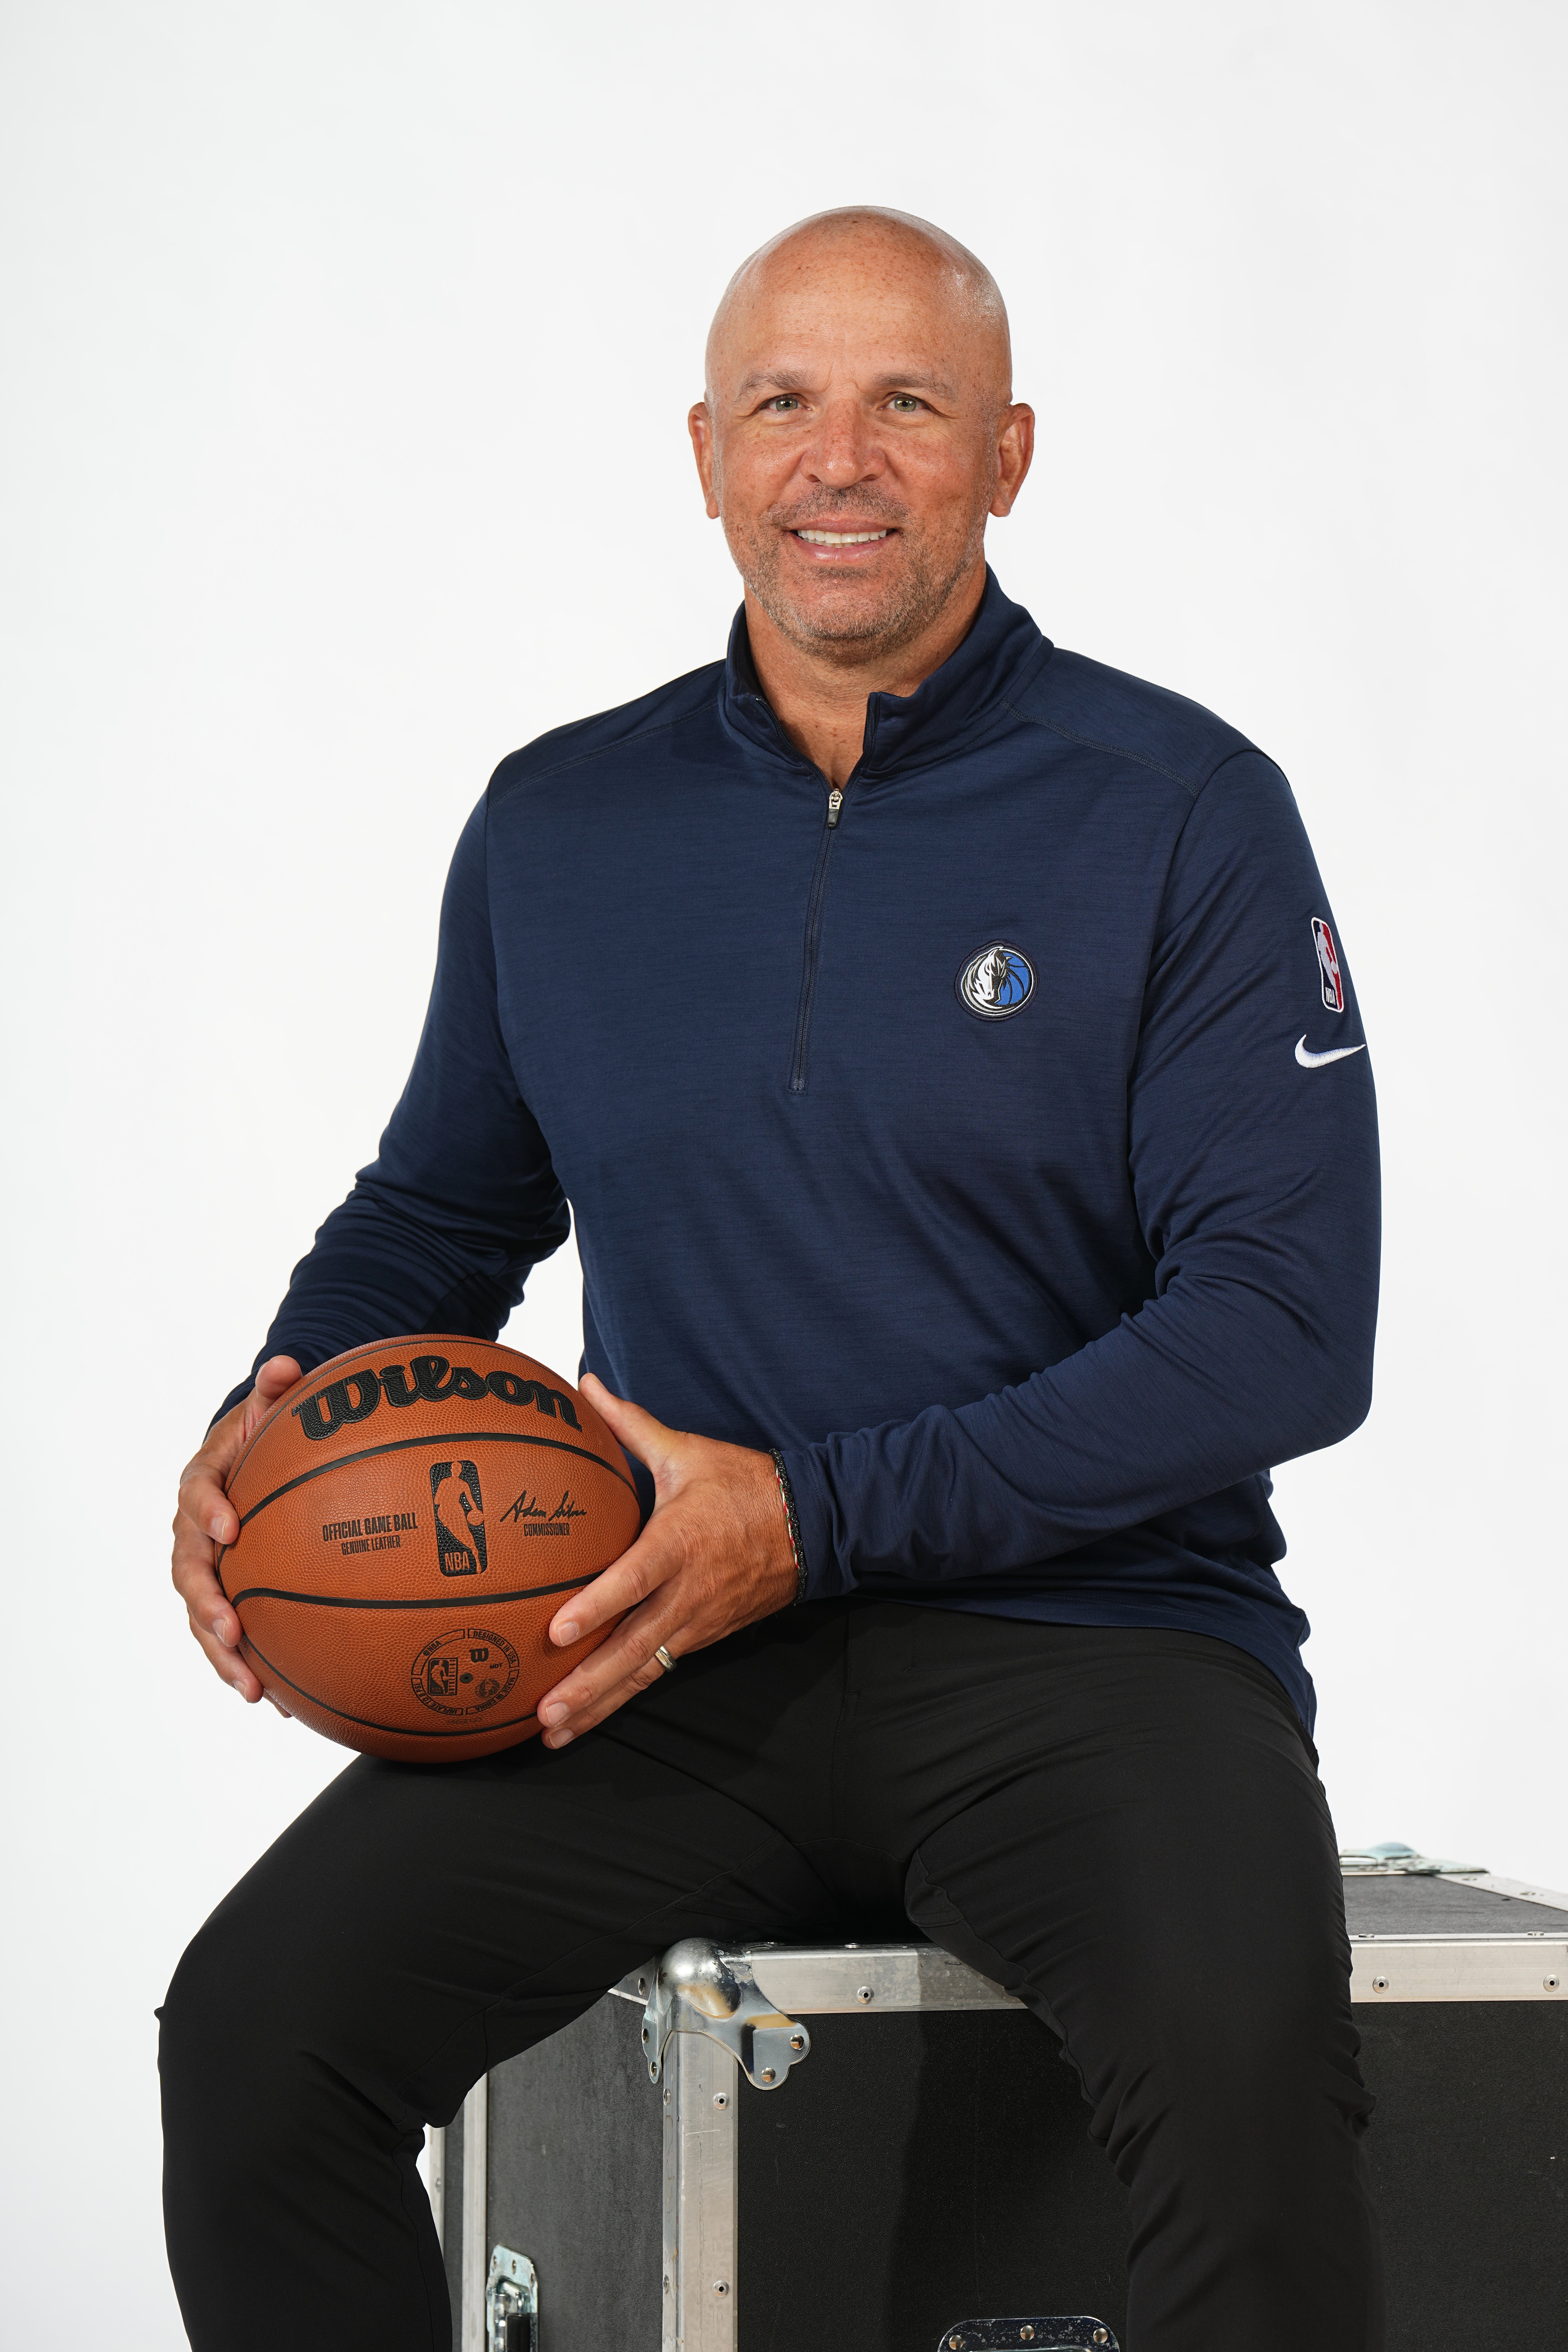 Jason Kidd during NBA Media Day on September 26, 2022, at American Airlines Center in Dallas, Texas. | Source: Getty Images